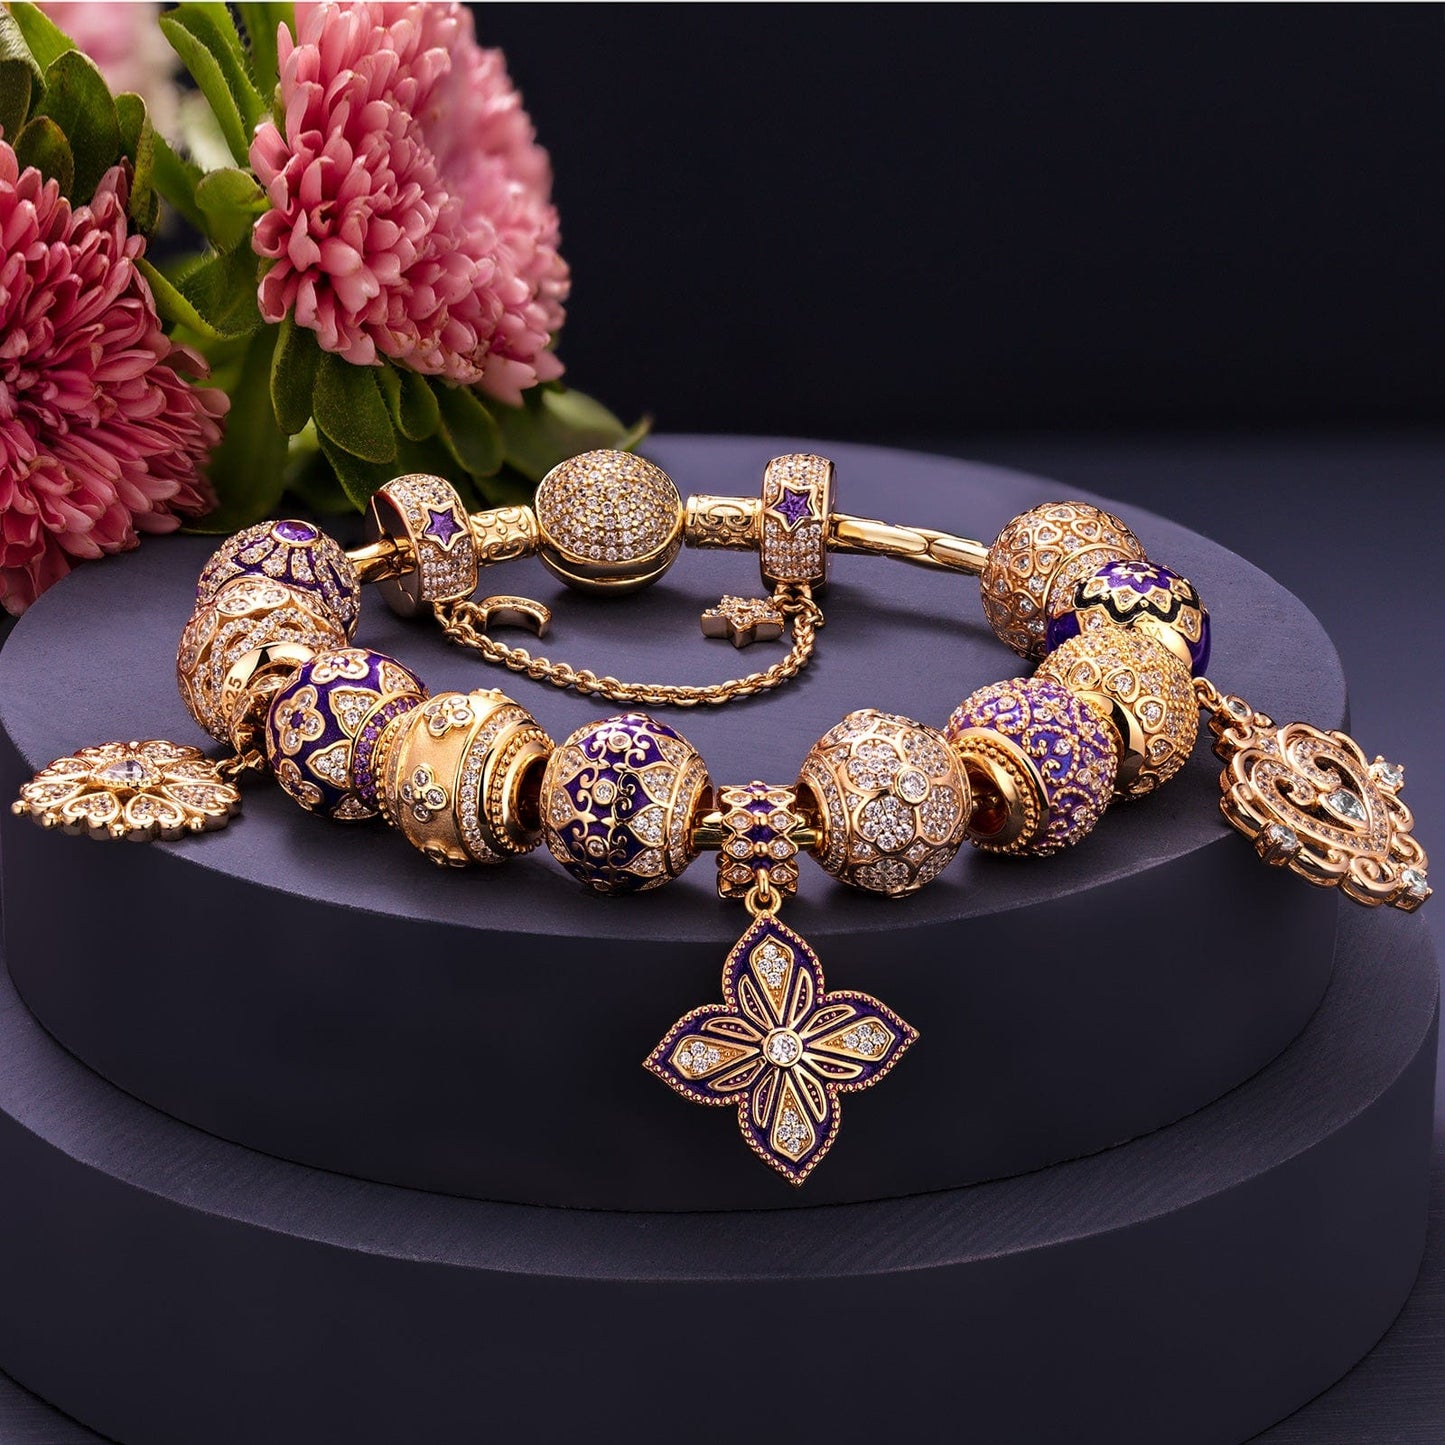 Sterling Silver Blooming Cherish and Bliss Charms Bracelet Set With Enamel In 14K Gold Plated